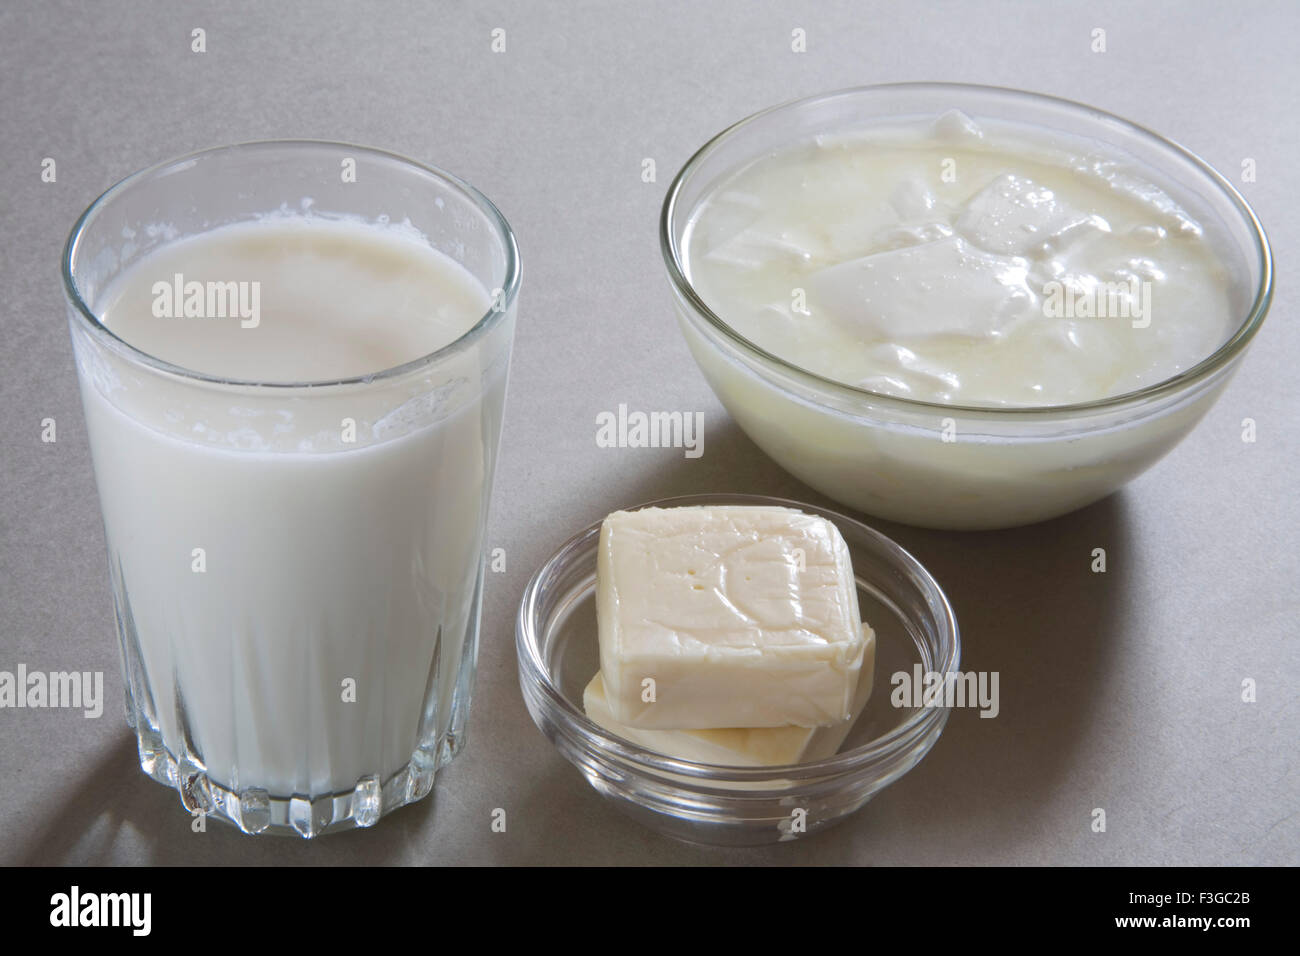 Full glass of milk curd yogurt dahi and cheese made from milk or dairy product ; India Stock Photo